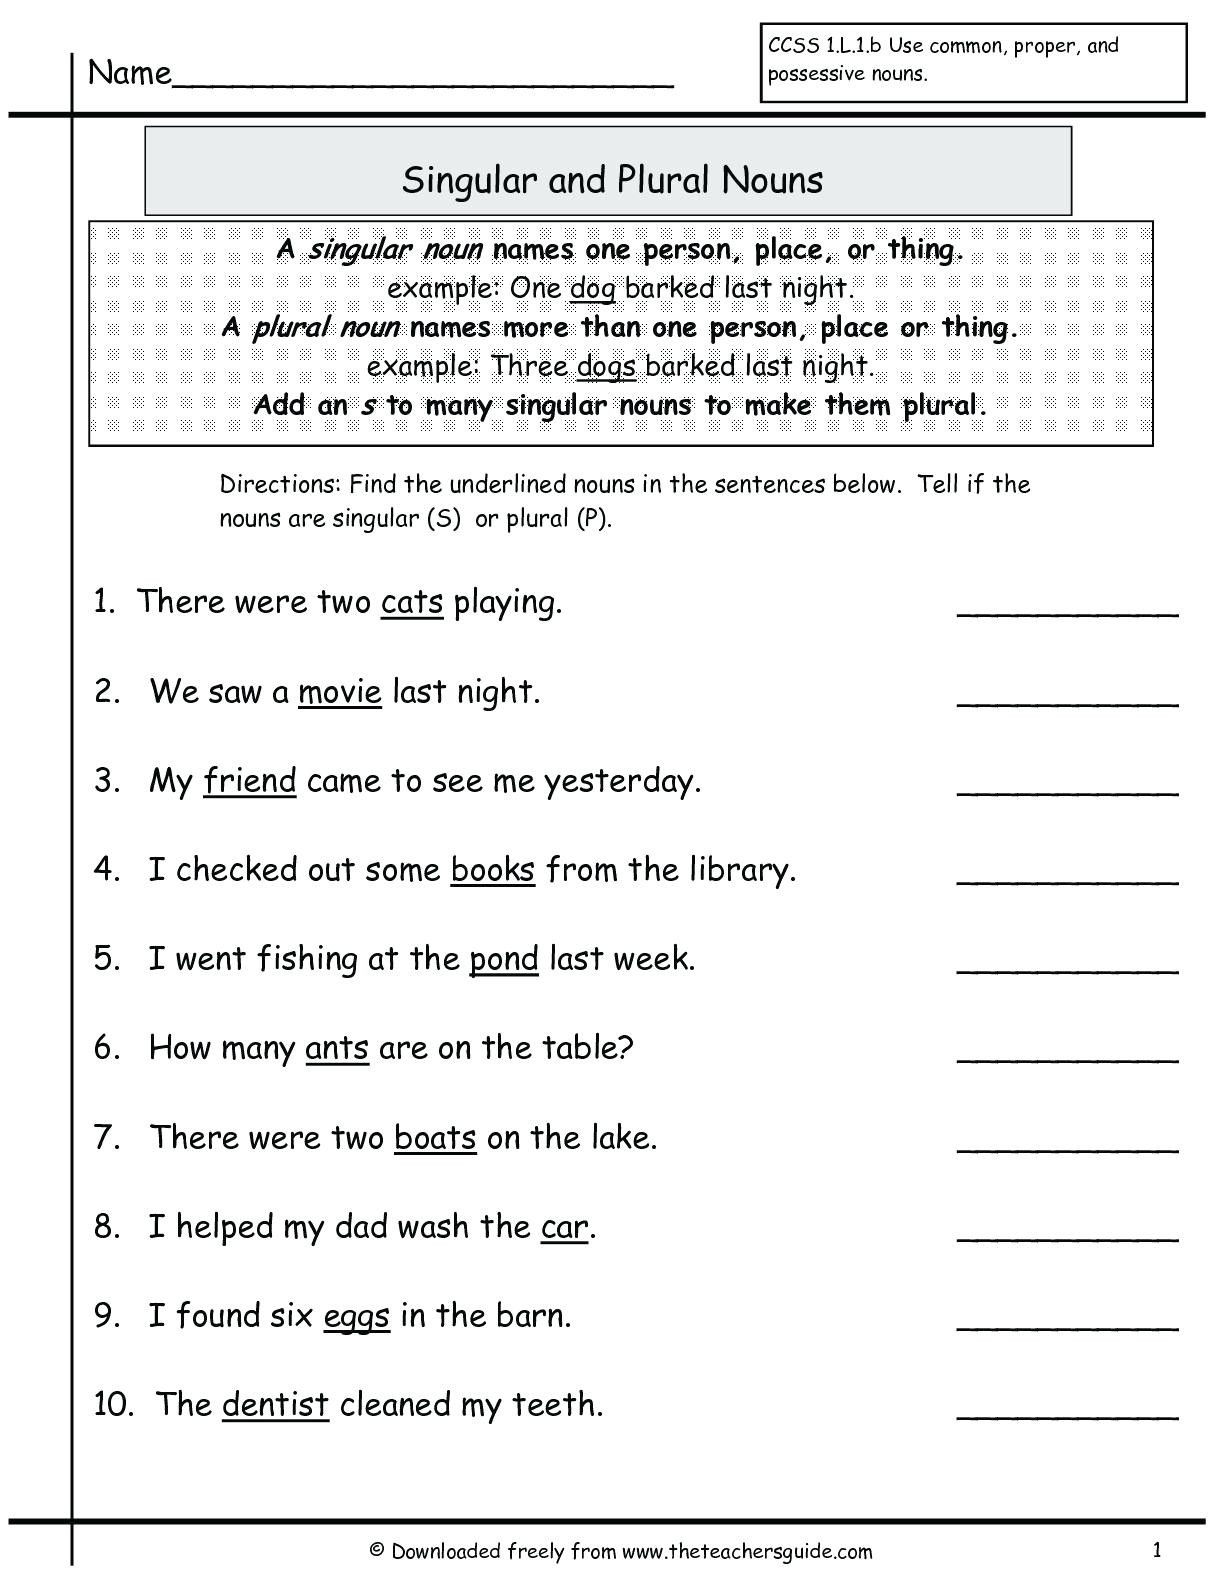 Free 6th Grade Science Worksheets Science 4th Grade Worksheets Ecosystems